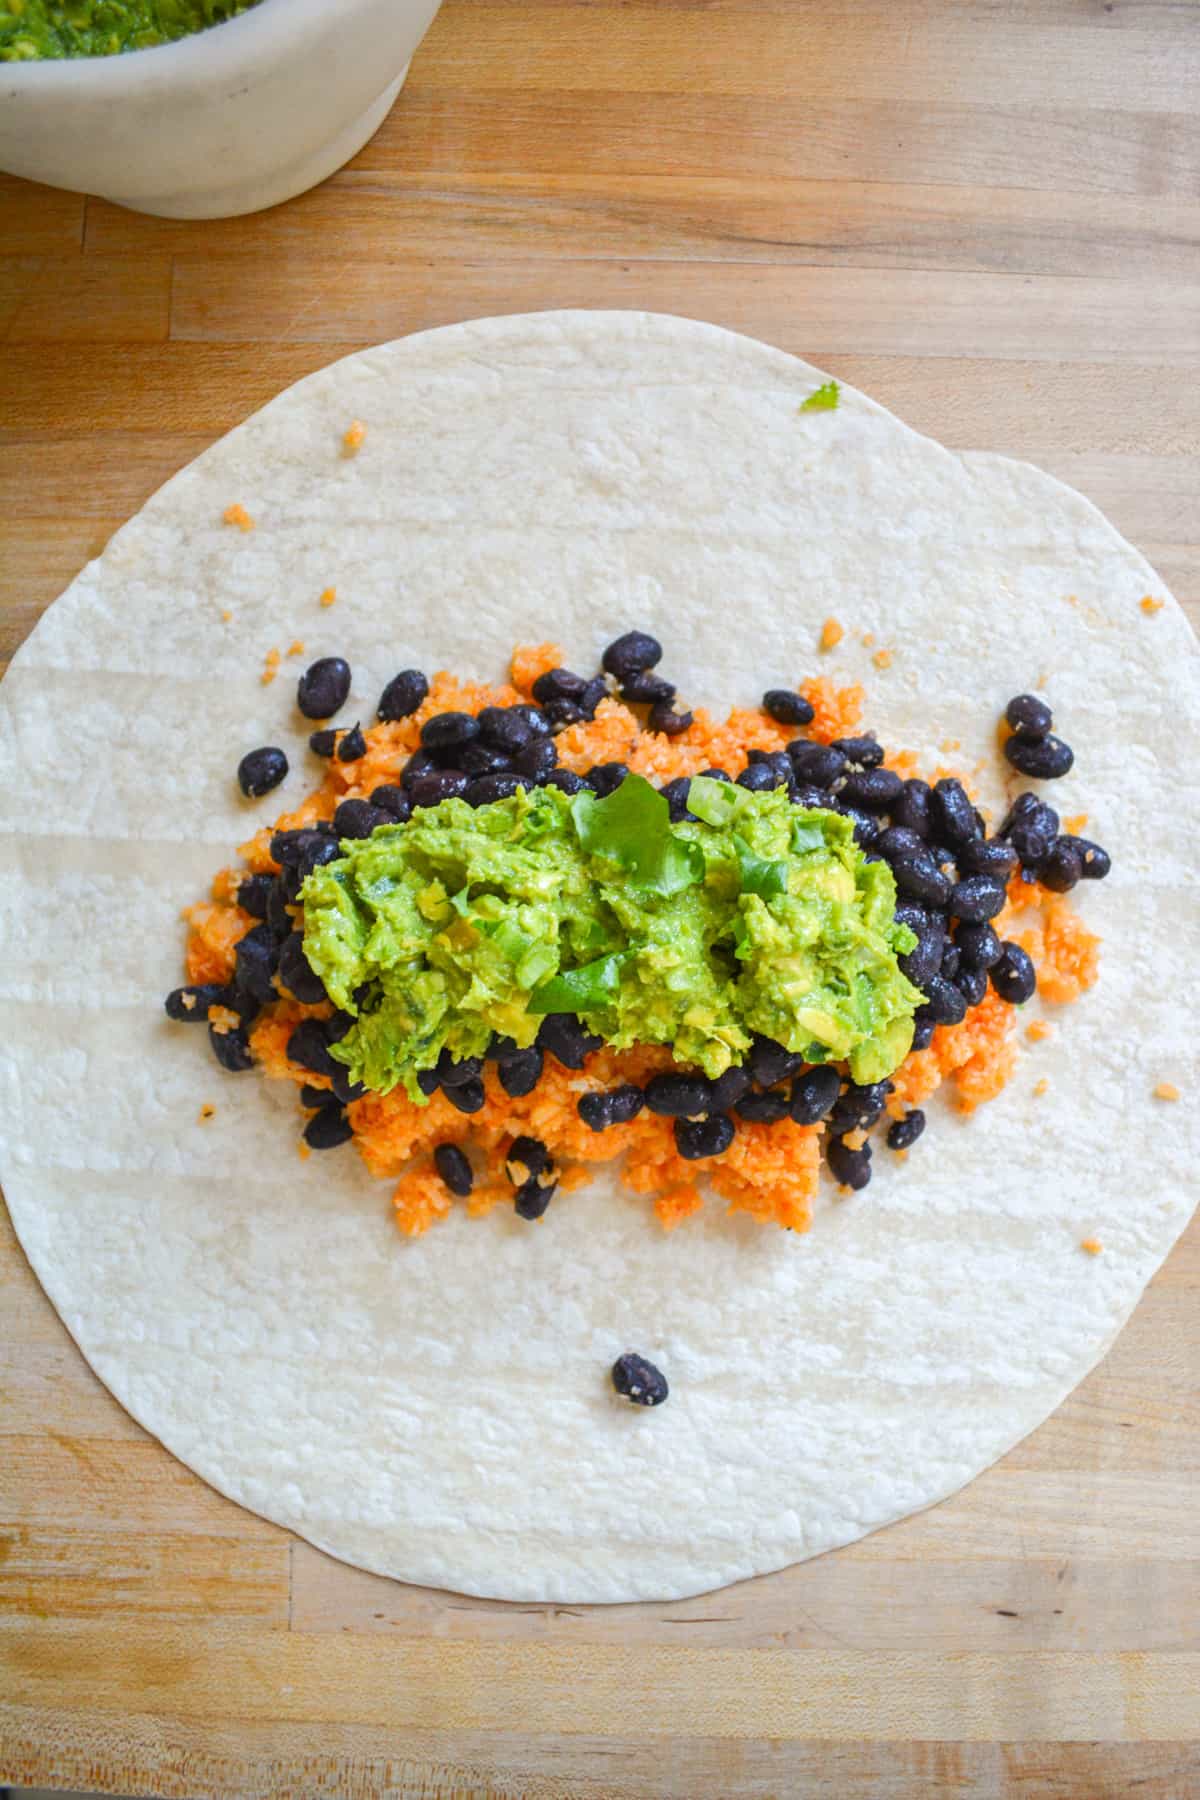 Large tortilla with buffalo cauliflower rice black beans and guacamole on it.